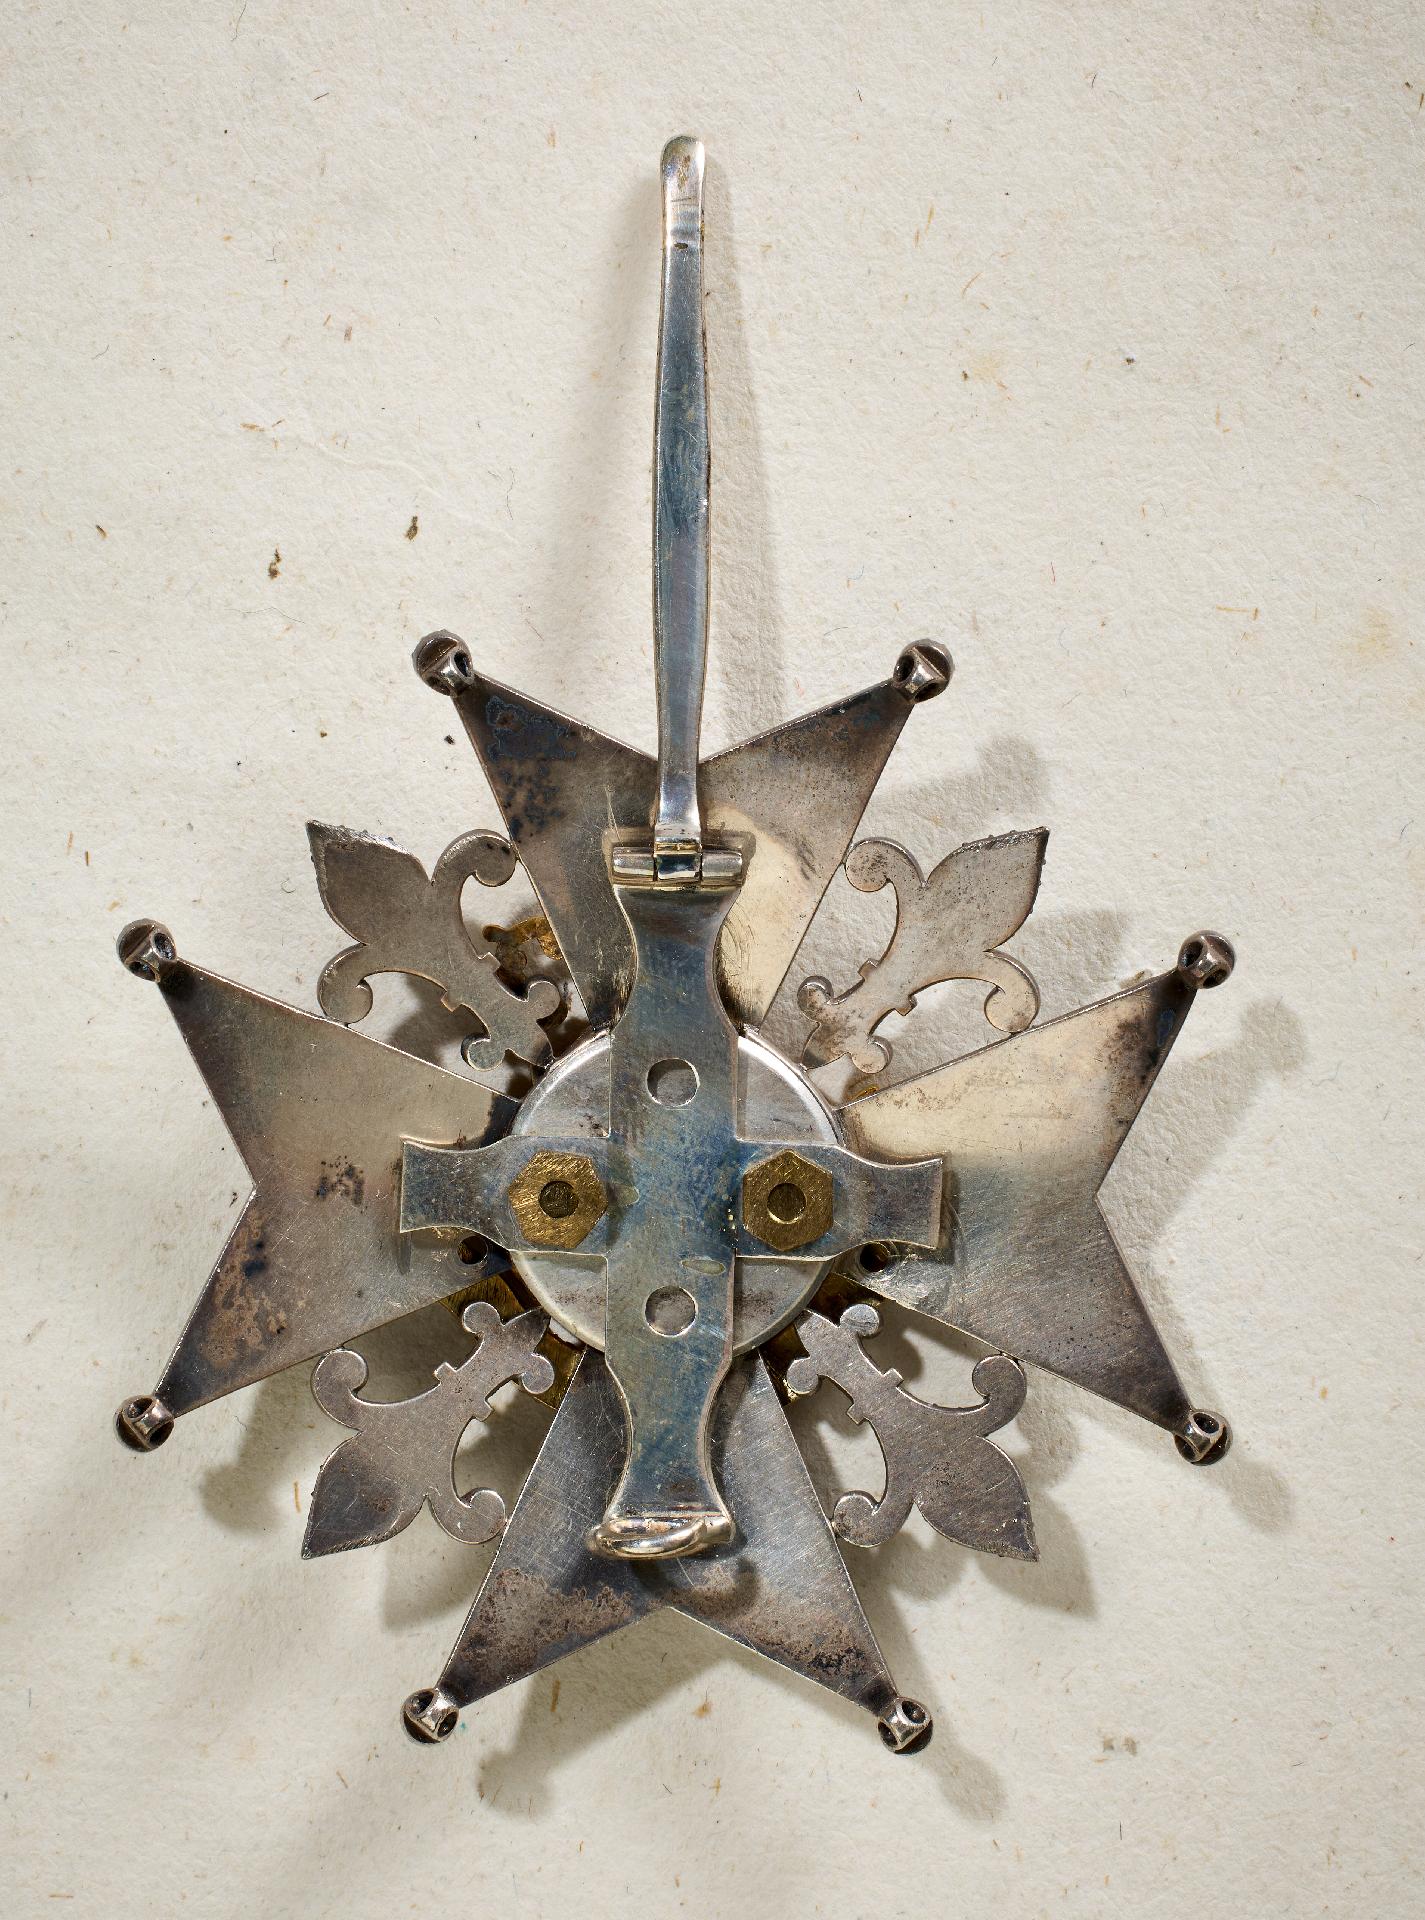 Königreich beider Sizilien : Order of St. Januarius Breast Star to the Ornamented Necklace. - Image 4 of 6